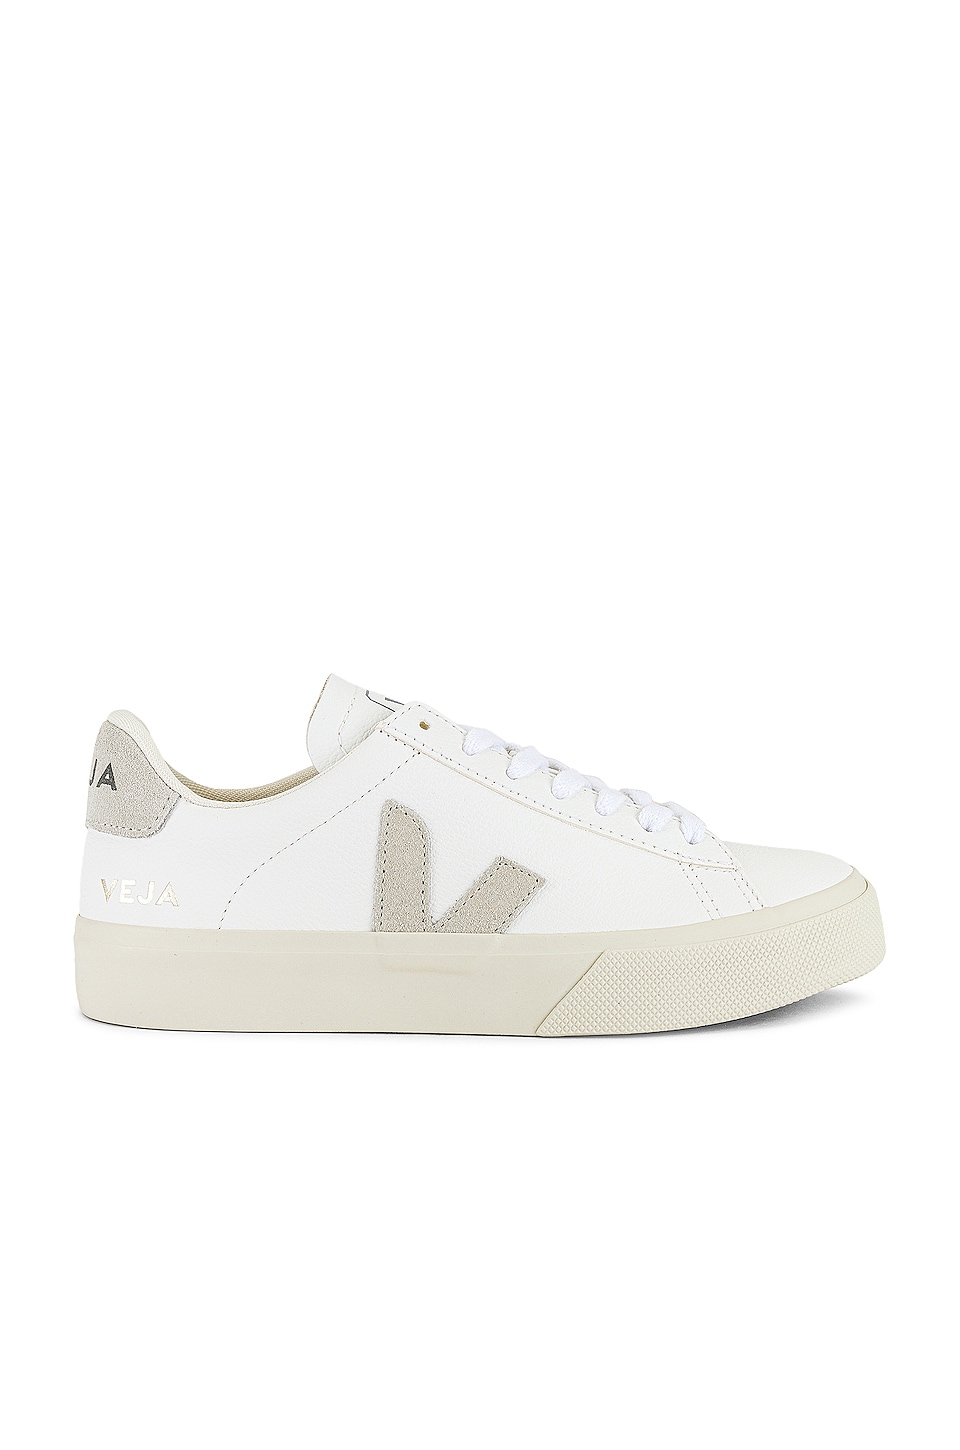 Veja Campo Sneaker in Extra White & Natural Suede | REVOLVE